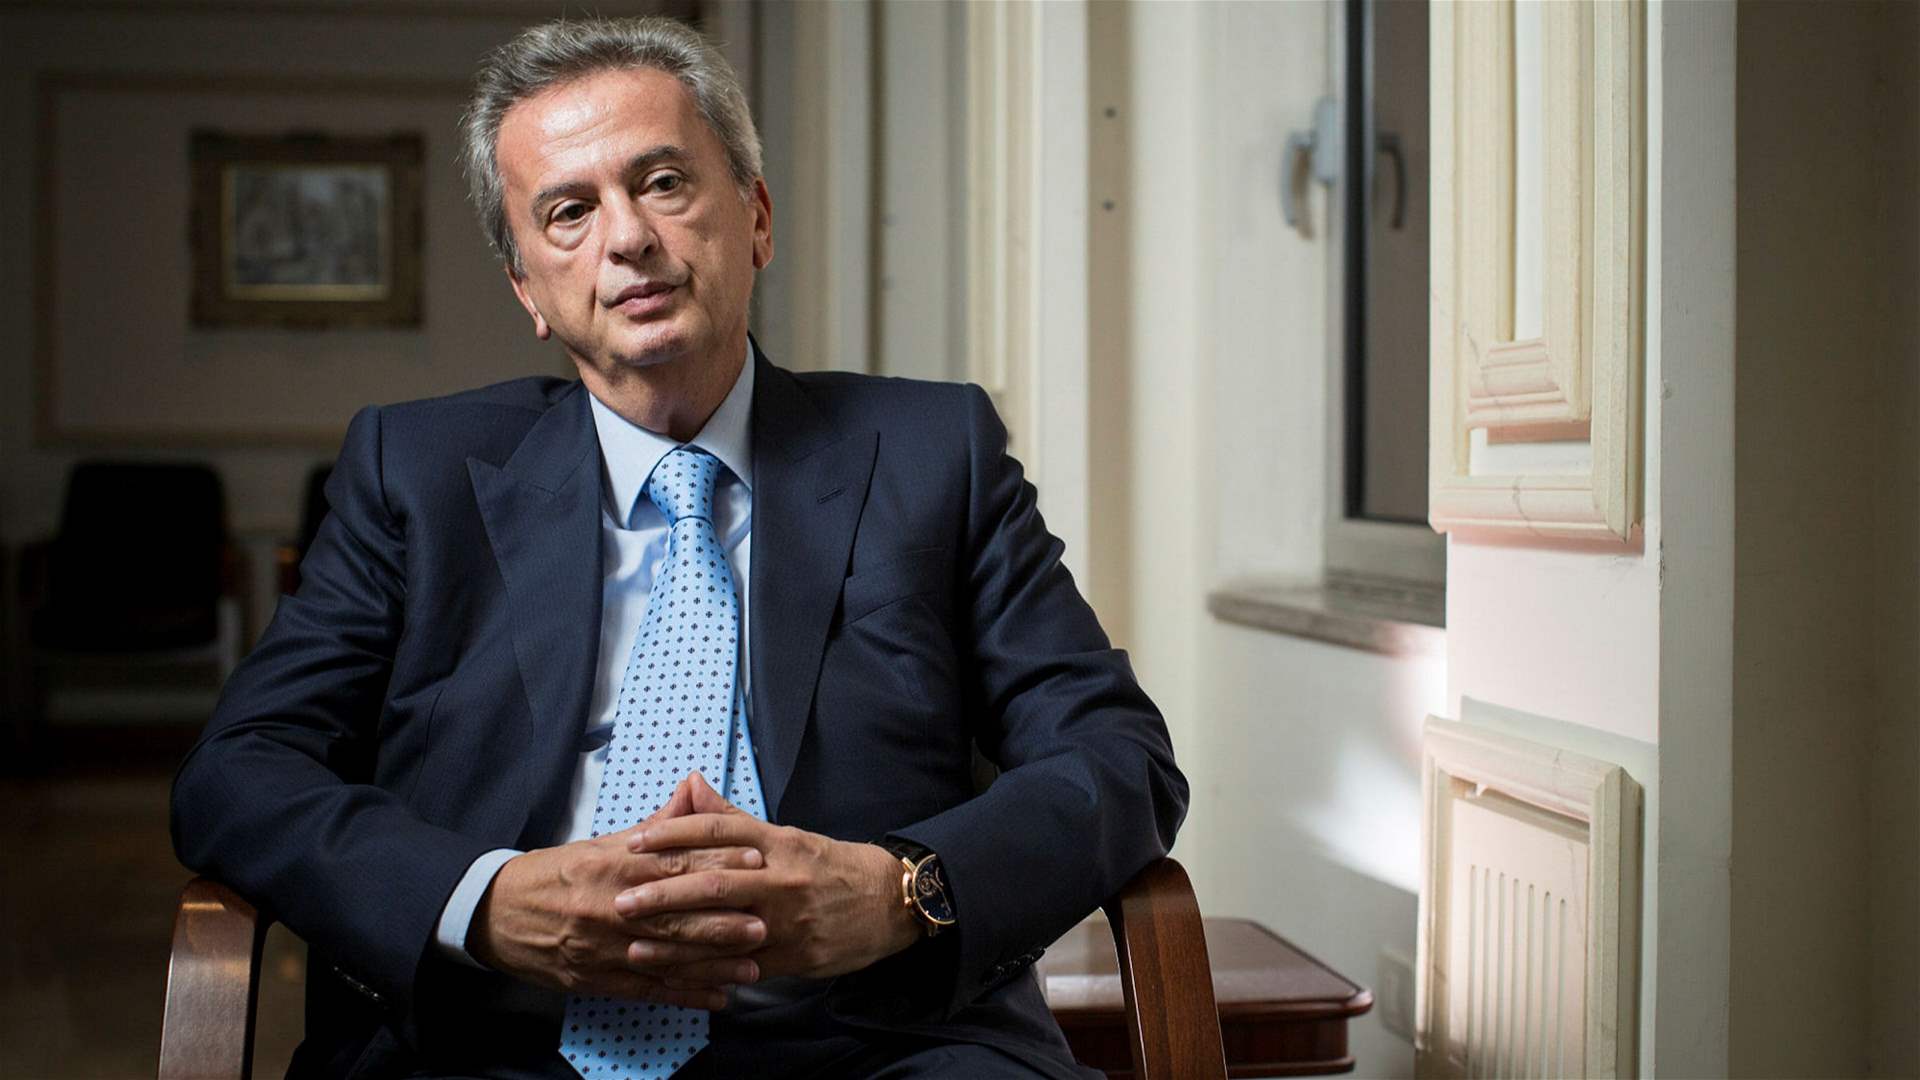 Legal battle: Riad Salameh&#39;s lawsuits add complexity to Beirut Port explosion investigation